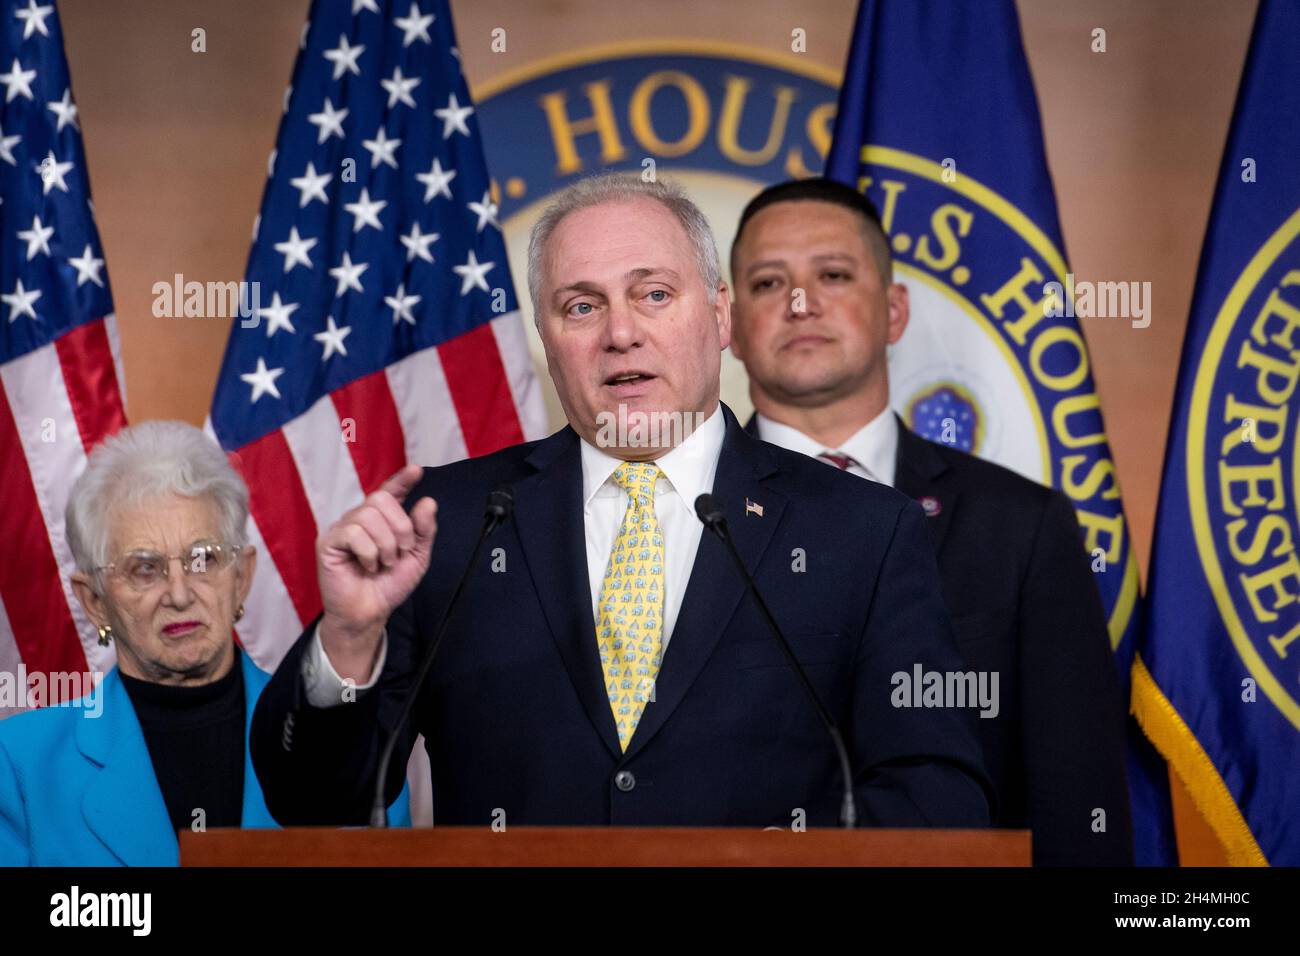 Washington, United States Of America. 03rd Nov, 2021. United States House Minority Whip Steve Scalise (Republican of Louisiana) offers remarks during a news conference at the US Capitol in Washington, DC, Wednesday, November 3, 2021. Credit: Rod Lamkey/CNP/Sipa USA Credit: Sipa USA/Alamy Live News Stock Photo